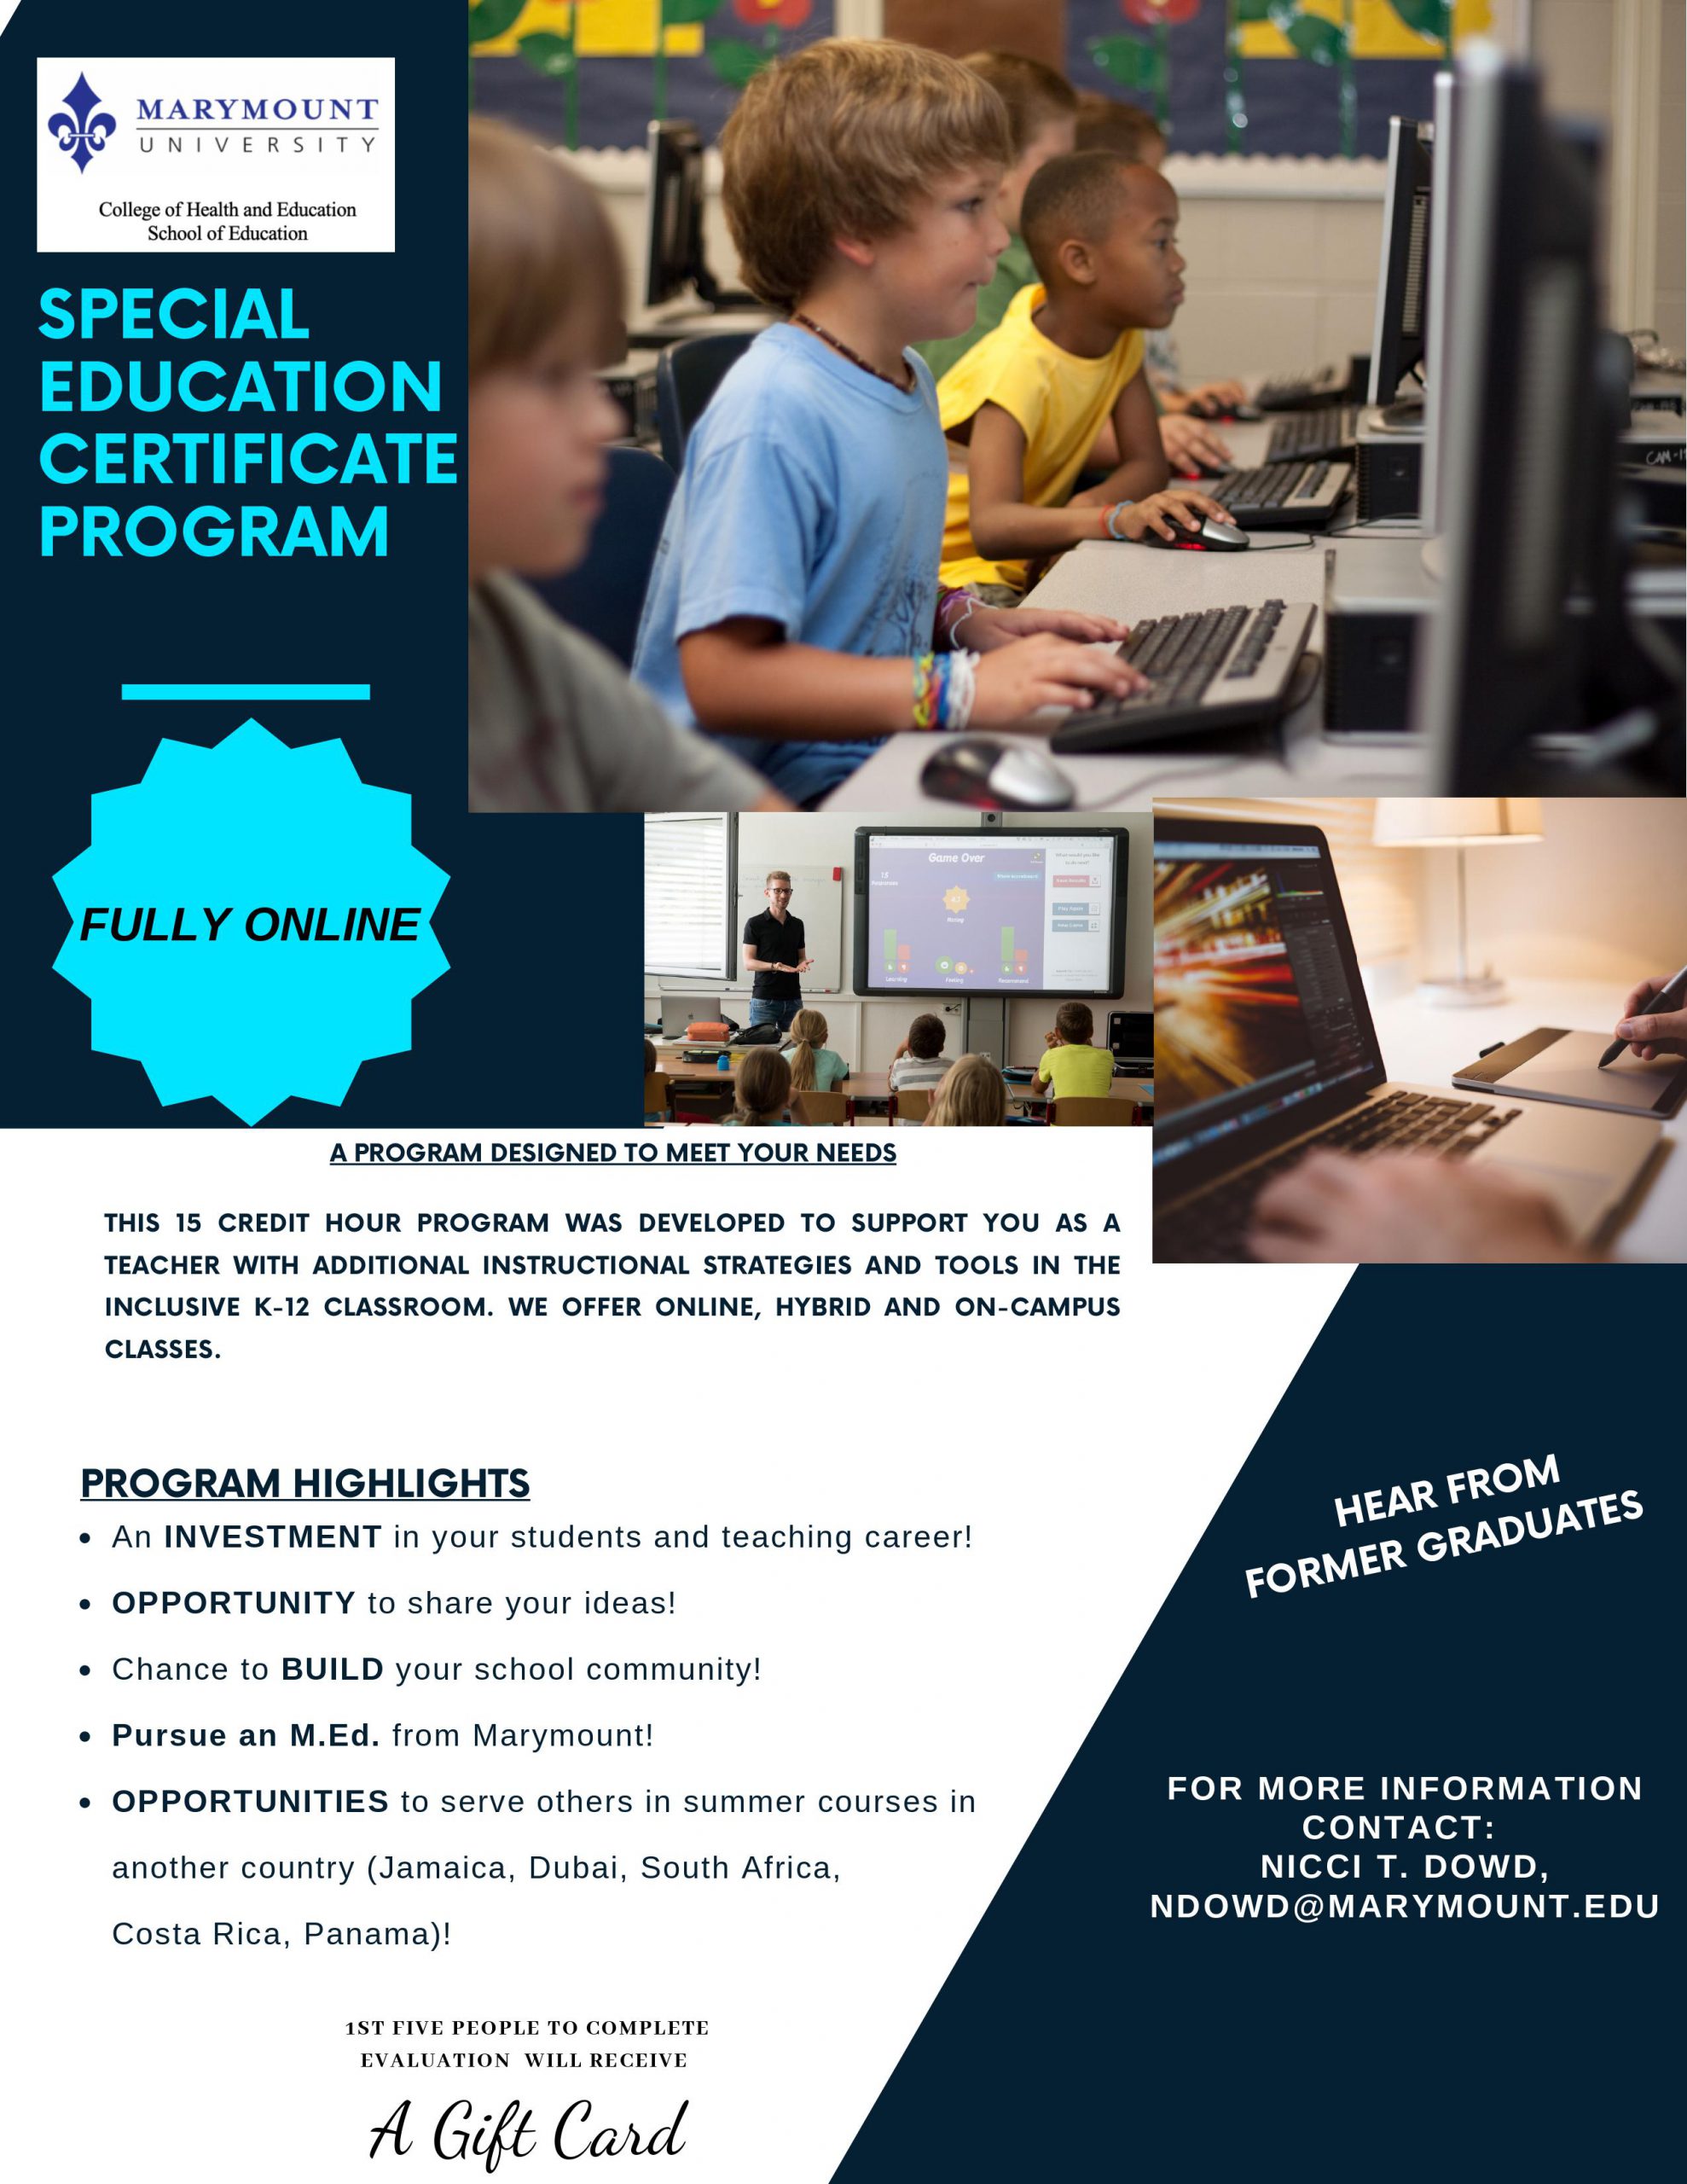 Interested in a Career in Special Education?